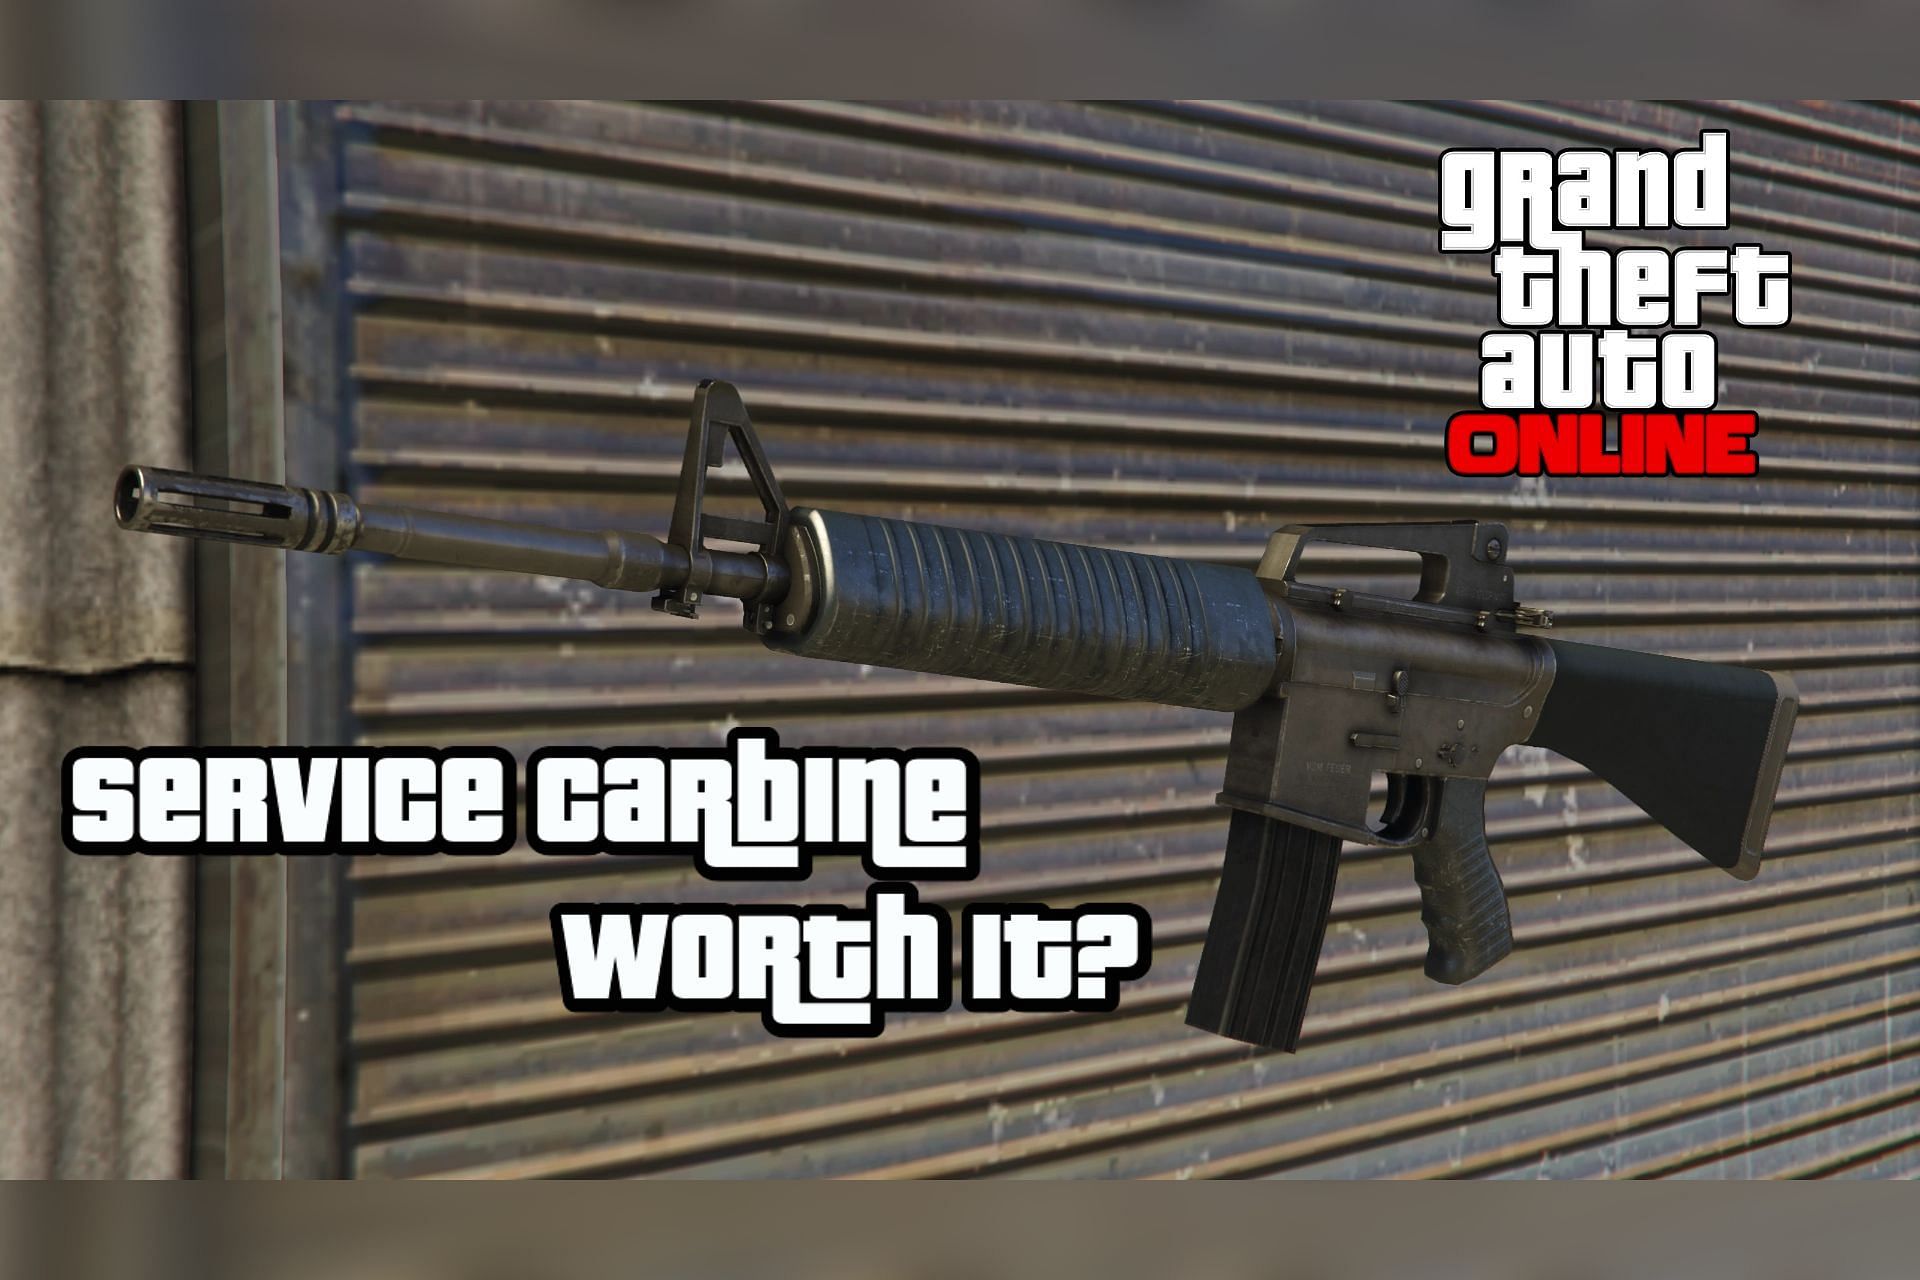 GTA Online players are still skeptical about the Service Carbine rifle (Image via GTA Fandom)